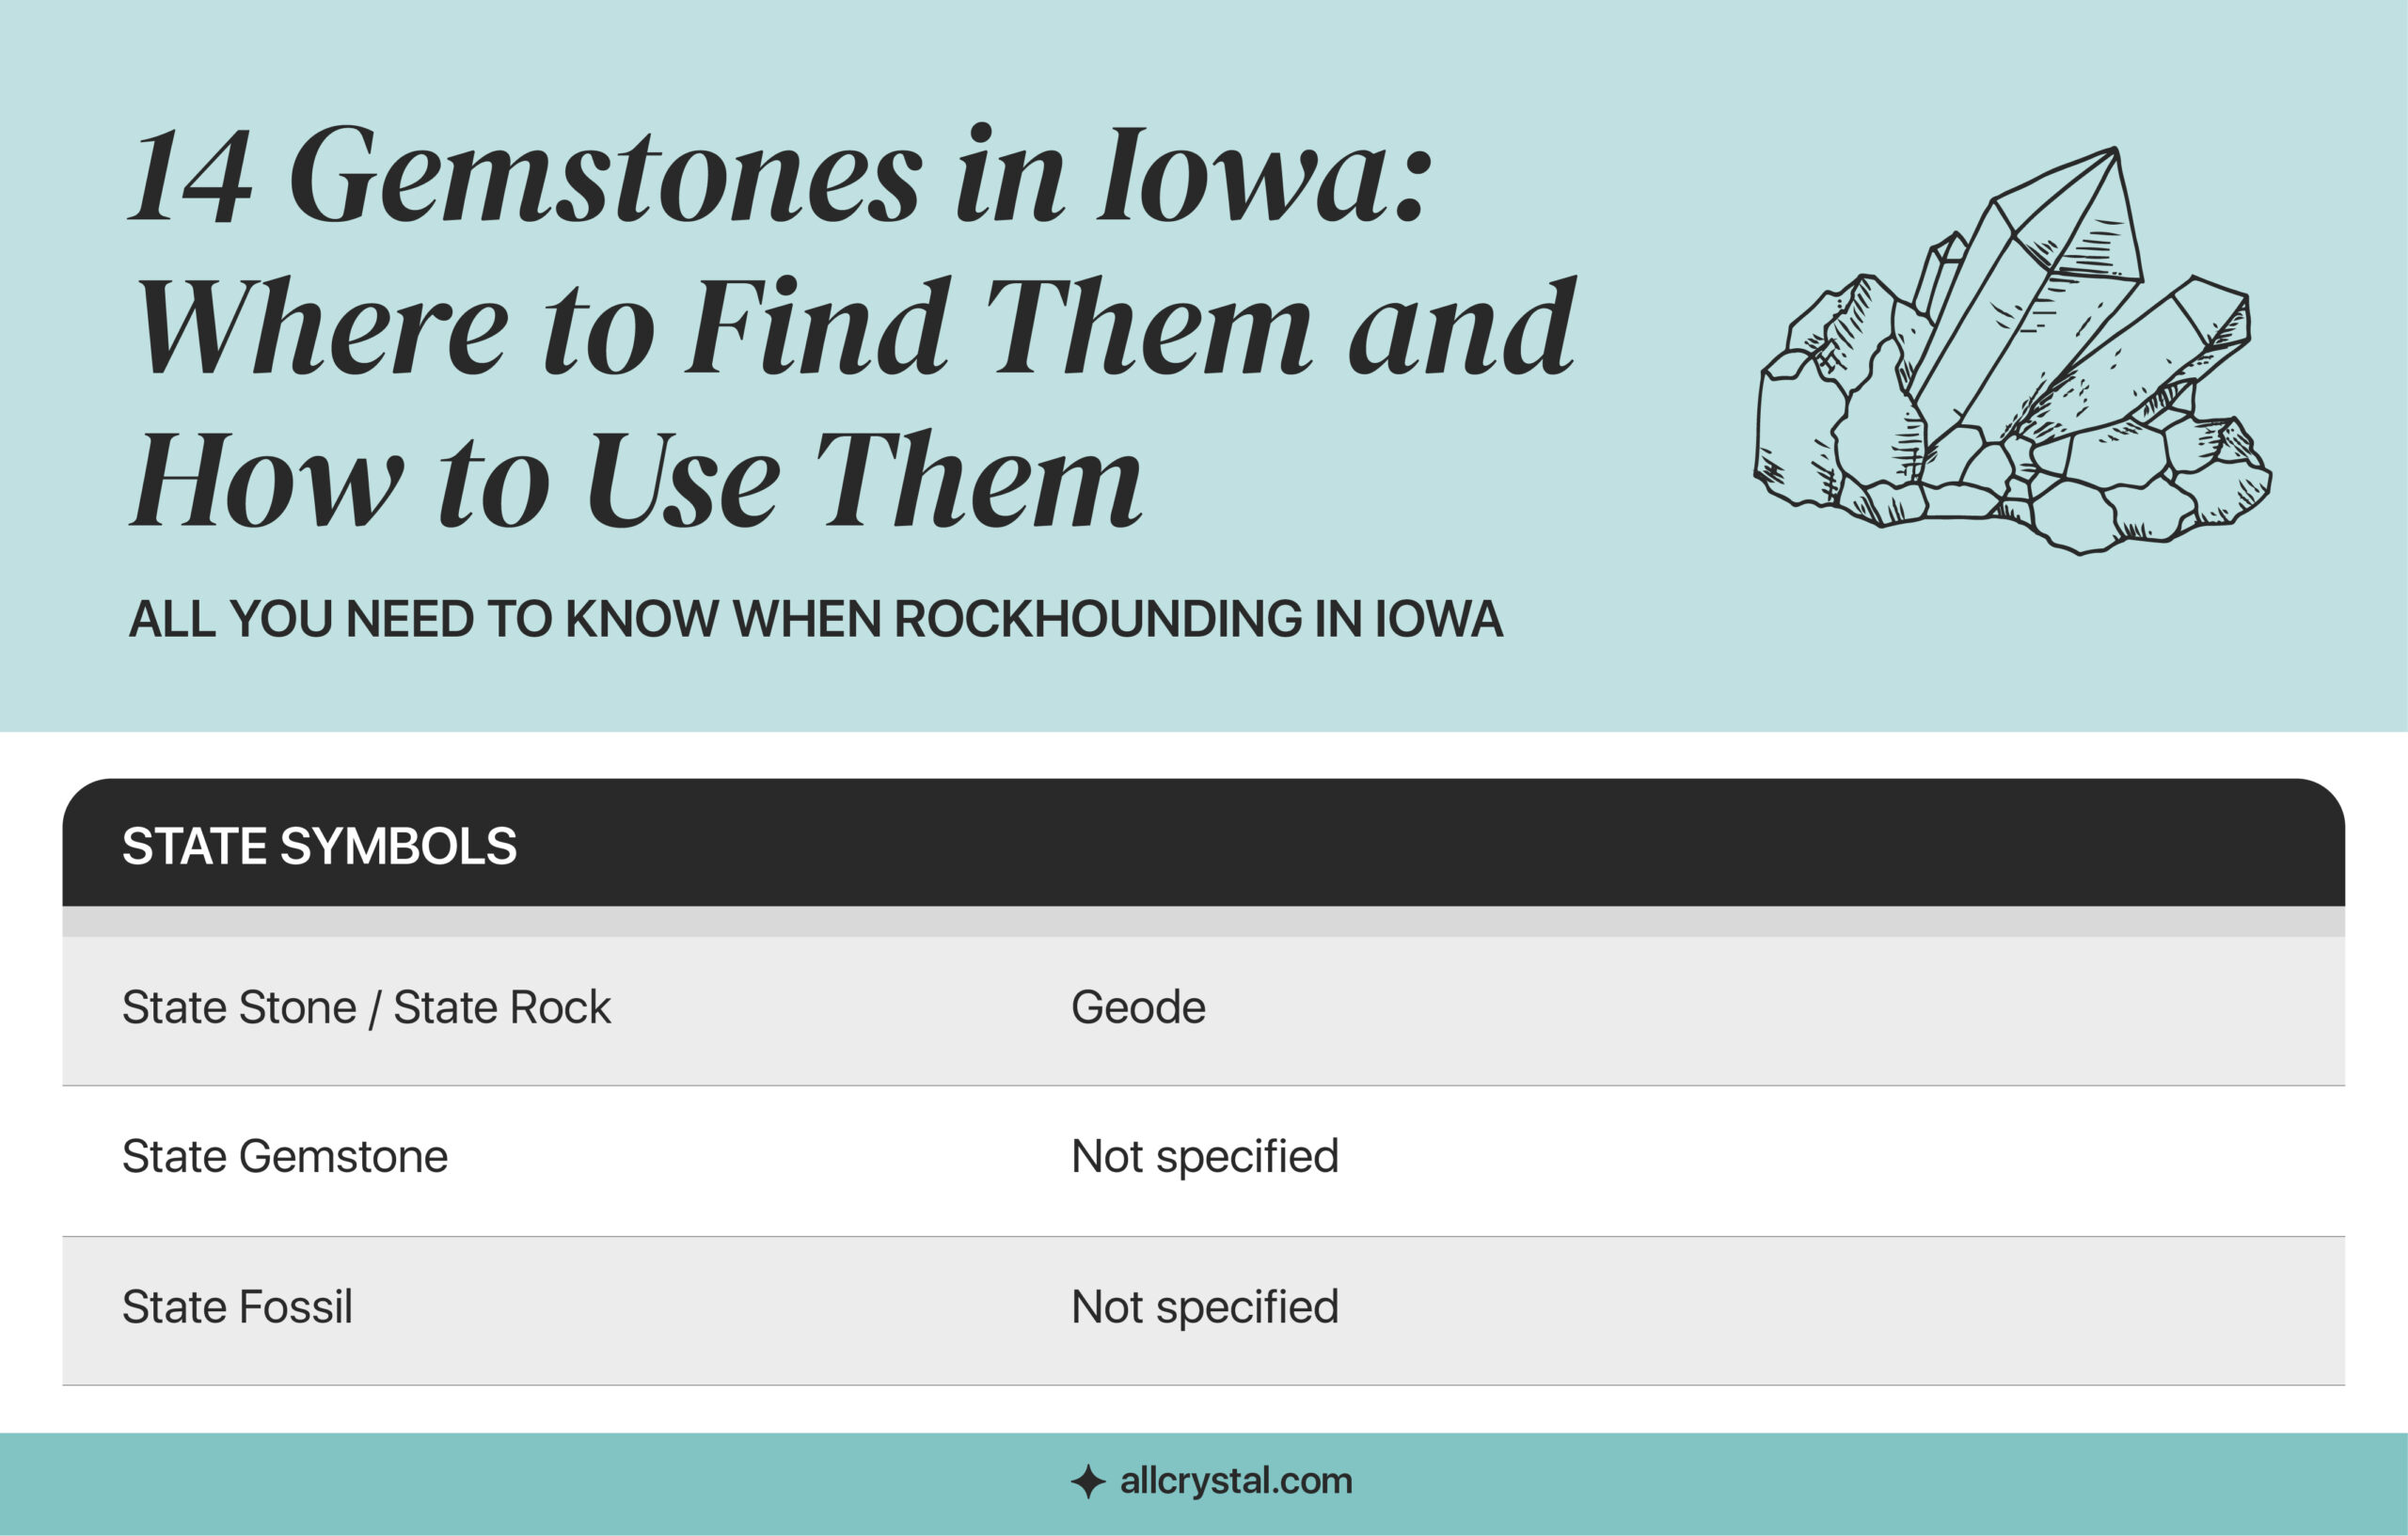 A graphic table containing information about All You Need to Know When Rockhounding in Iowa